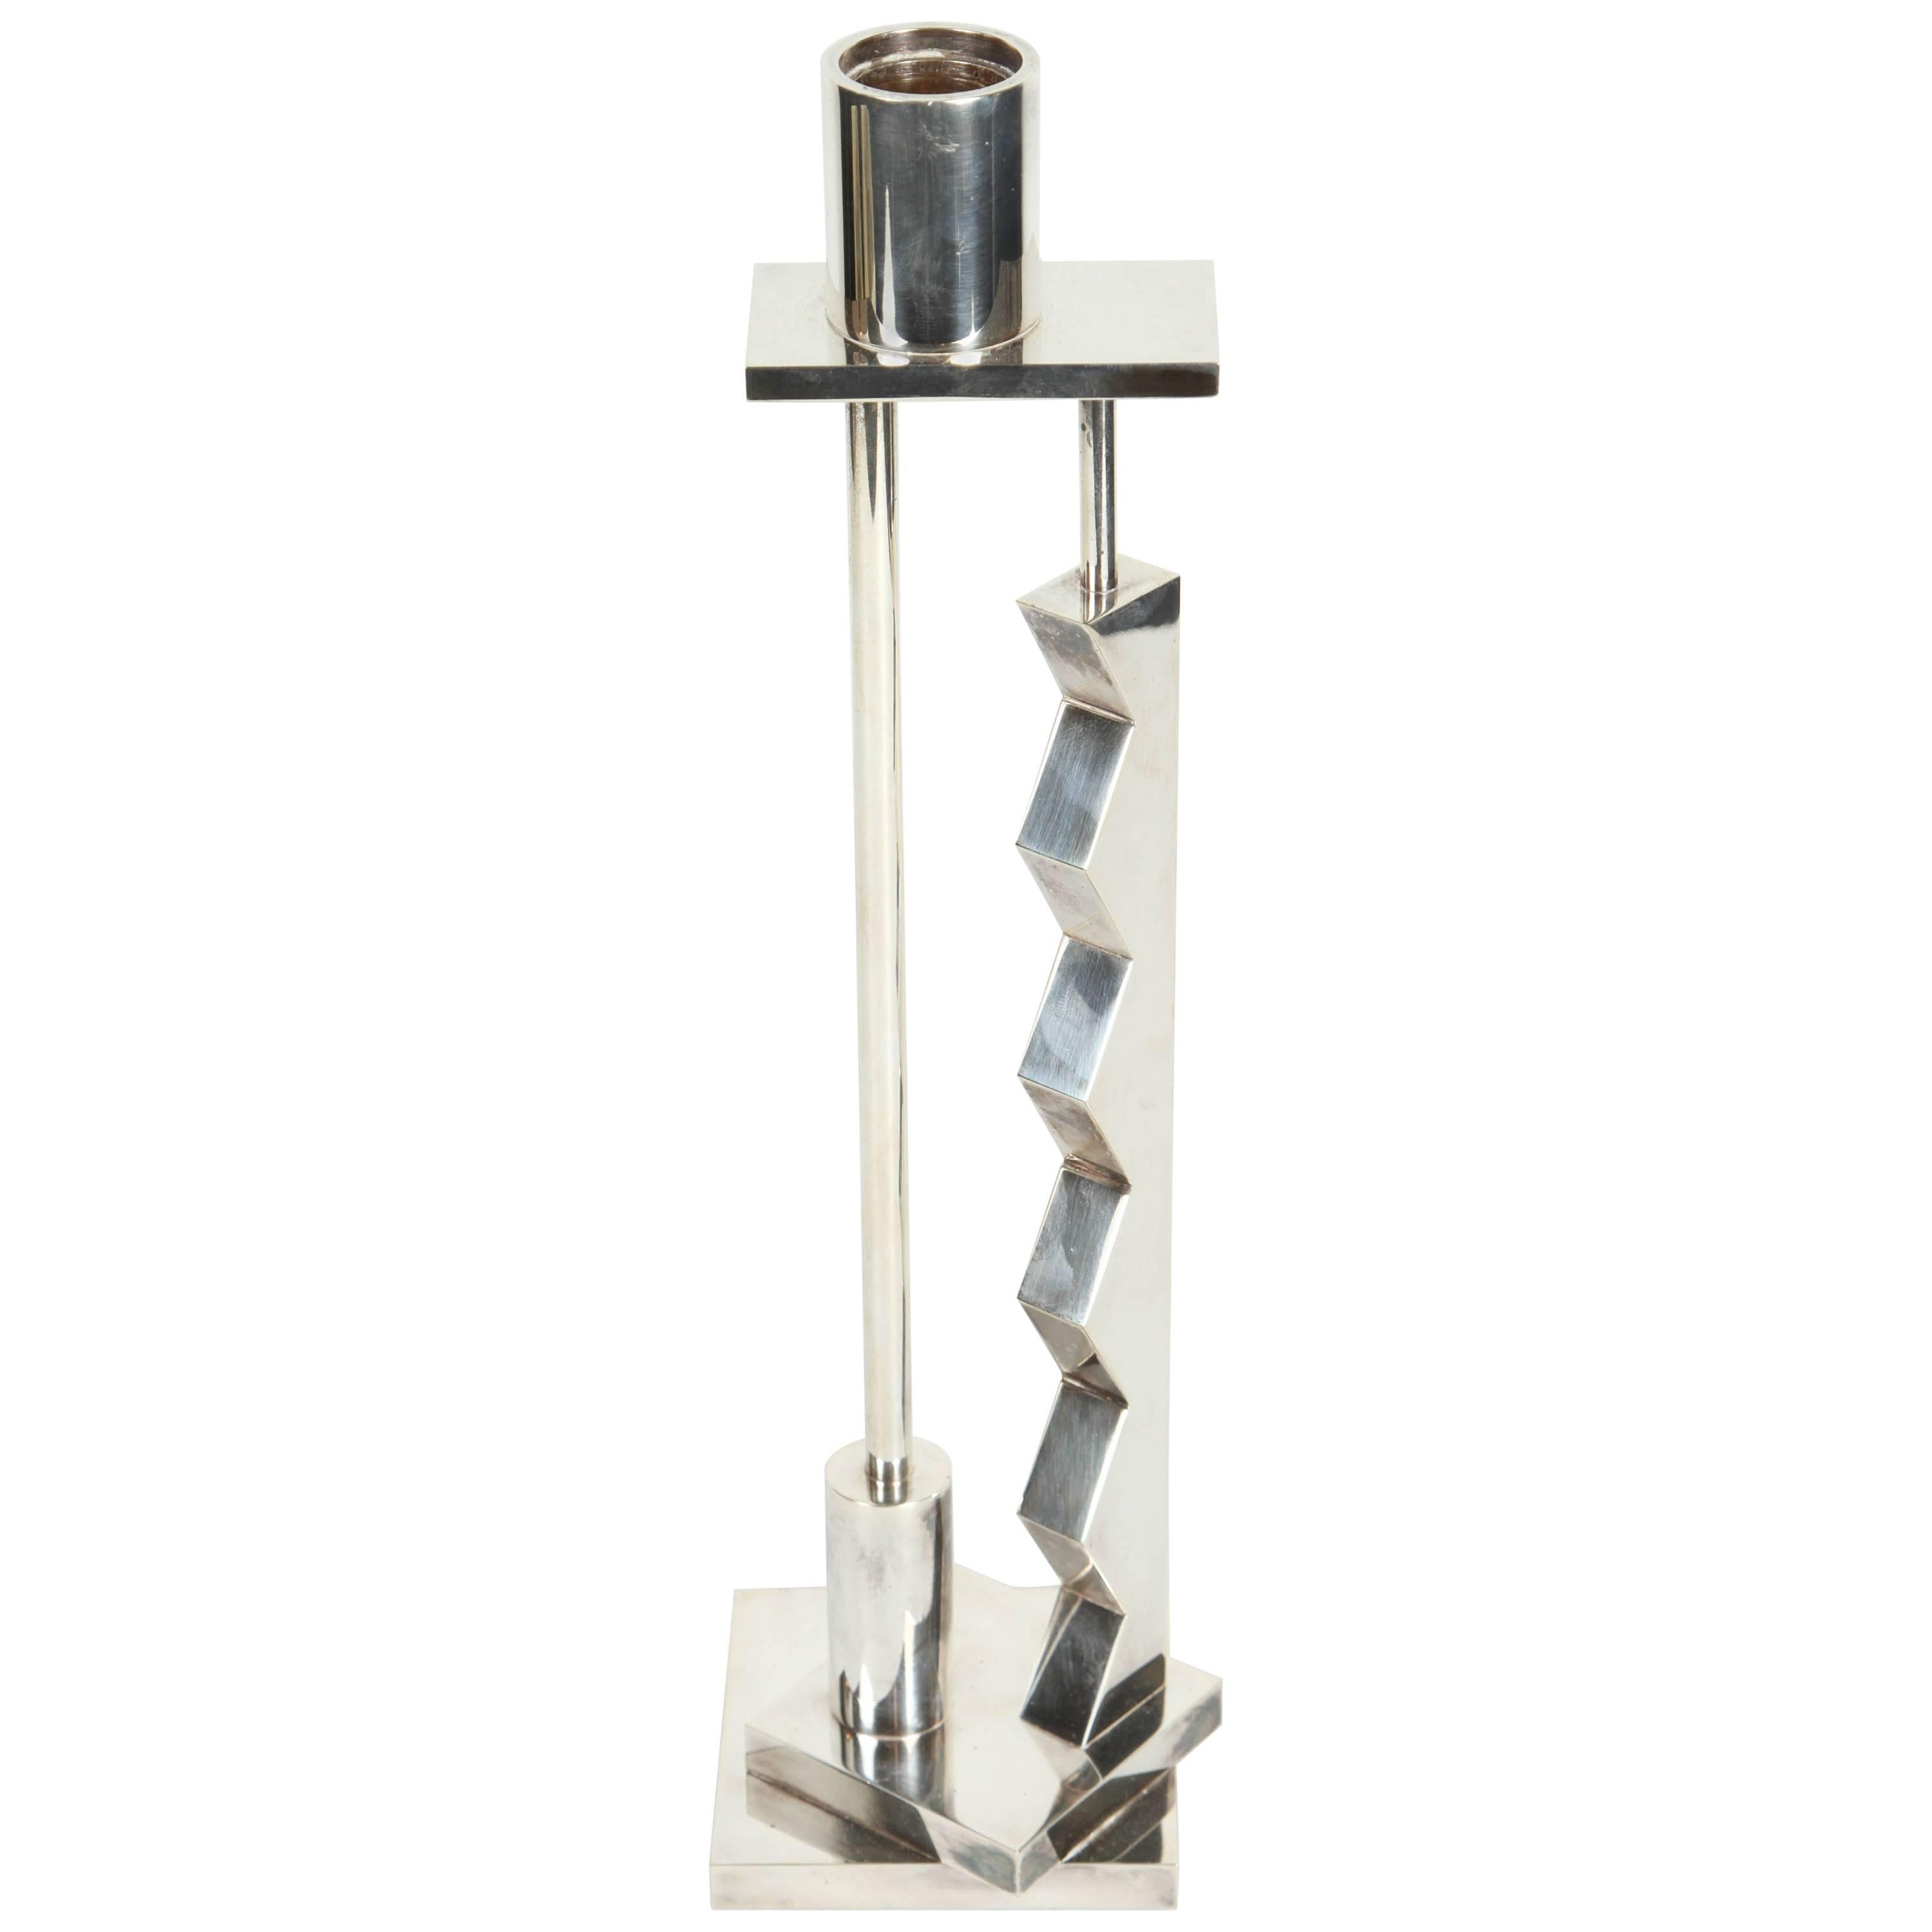 Silver-Plated Candlestick by Ettore Sottsass for Swid Powell